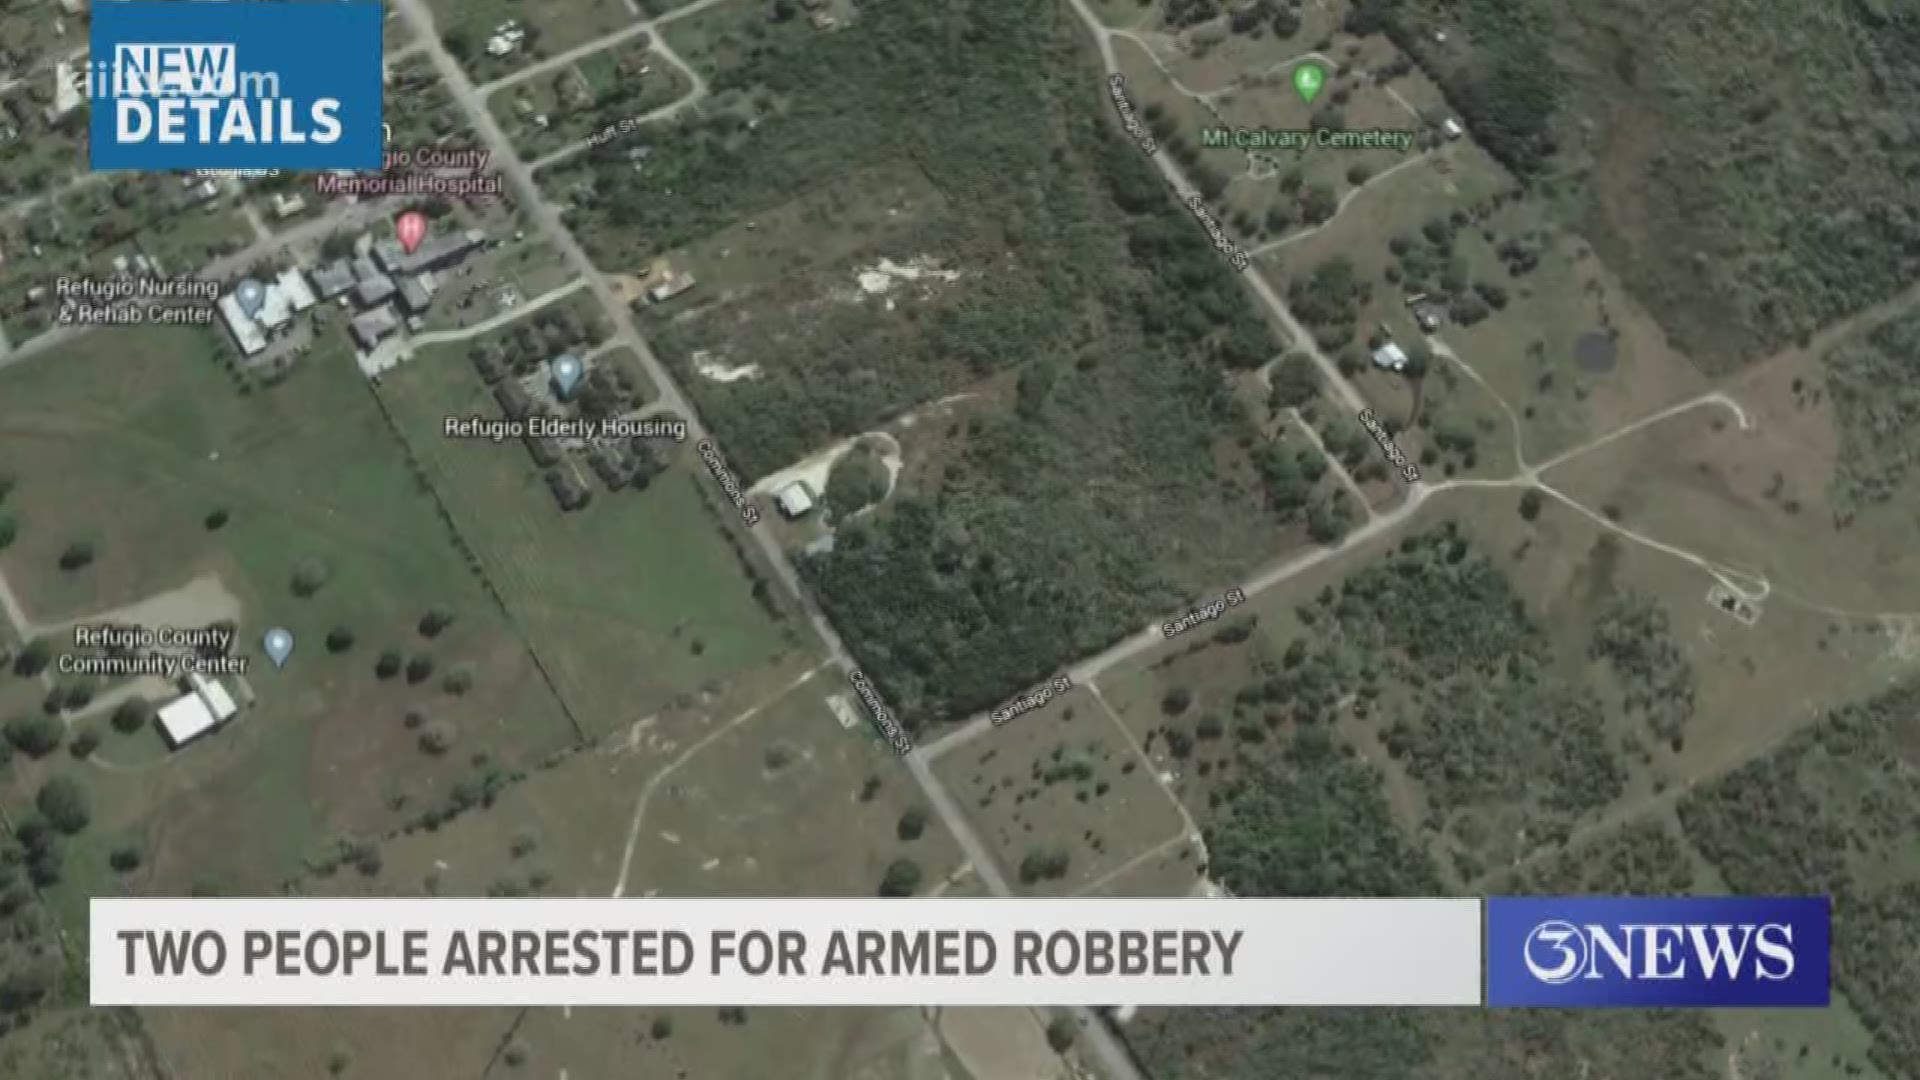 18-year-old Tara Jones and 23-year-old Kenneth Freeman are now facing charges for armed robbery.